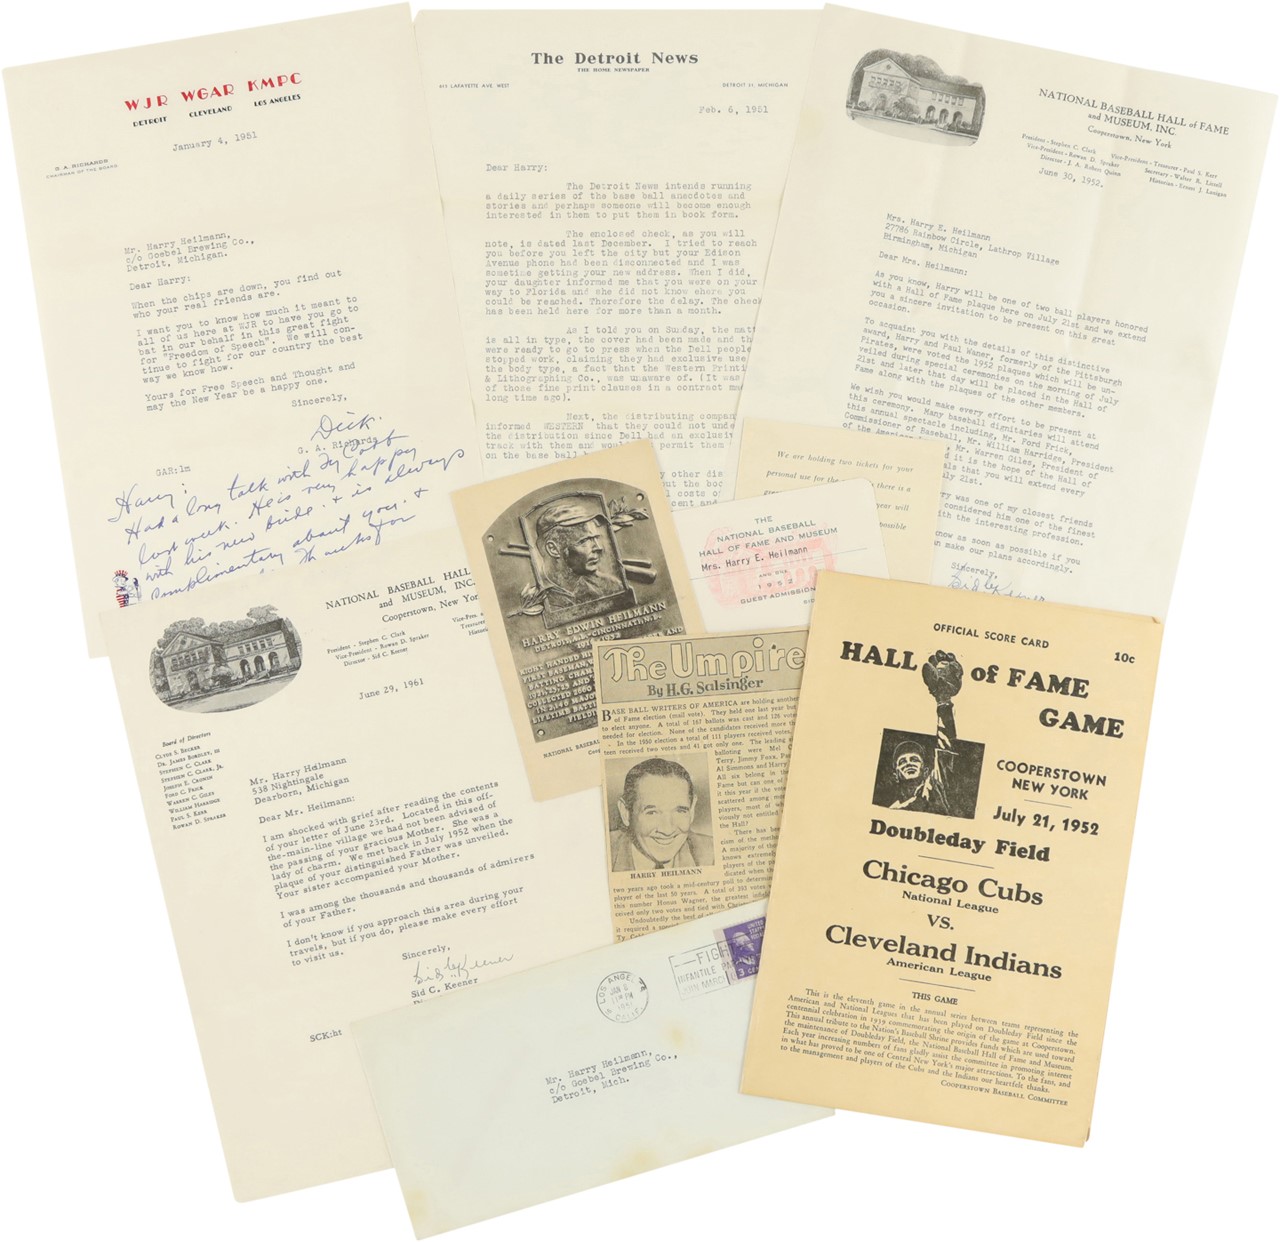 The Harry Heilmann Collection - Harry Heilmann and Family Personal Ephemera Collection Including Hall of Fame Pass (7)